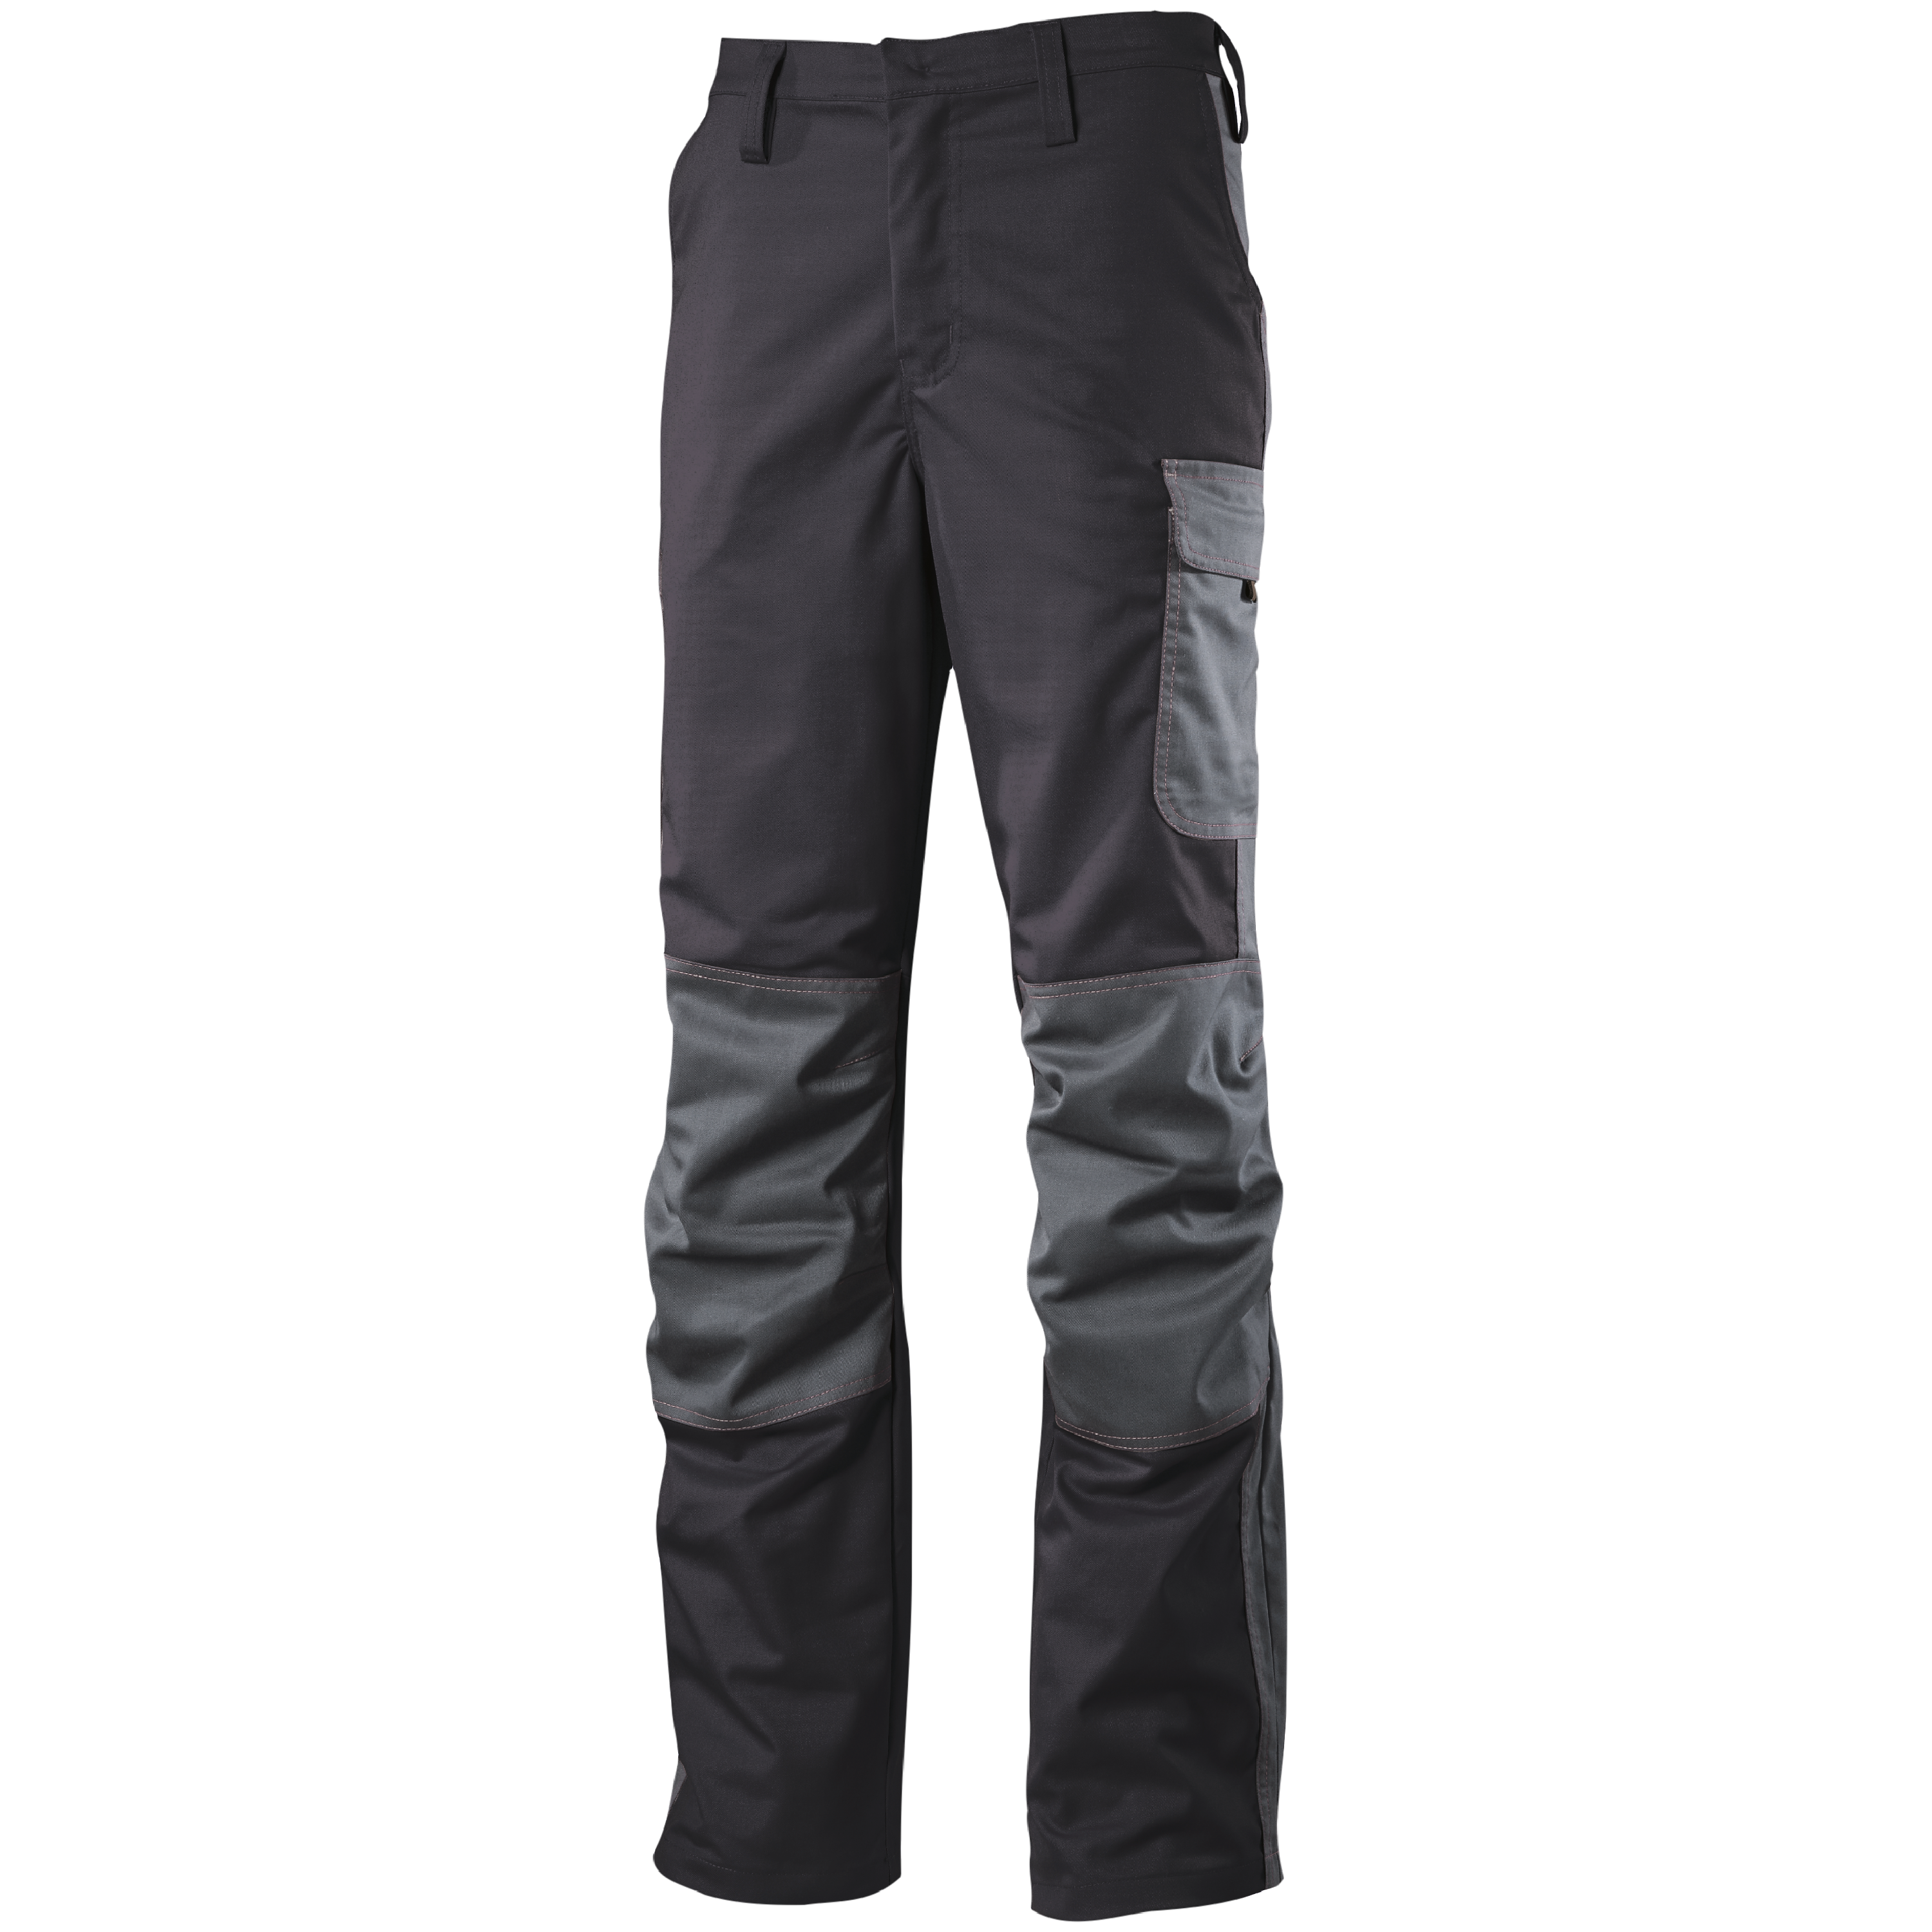 CWS Compact Line Trousers DarkGrey/Grey w/ Knee Reinforcements